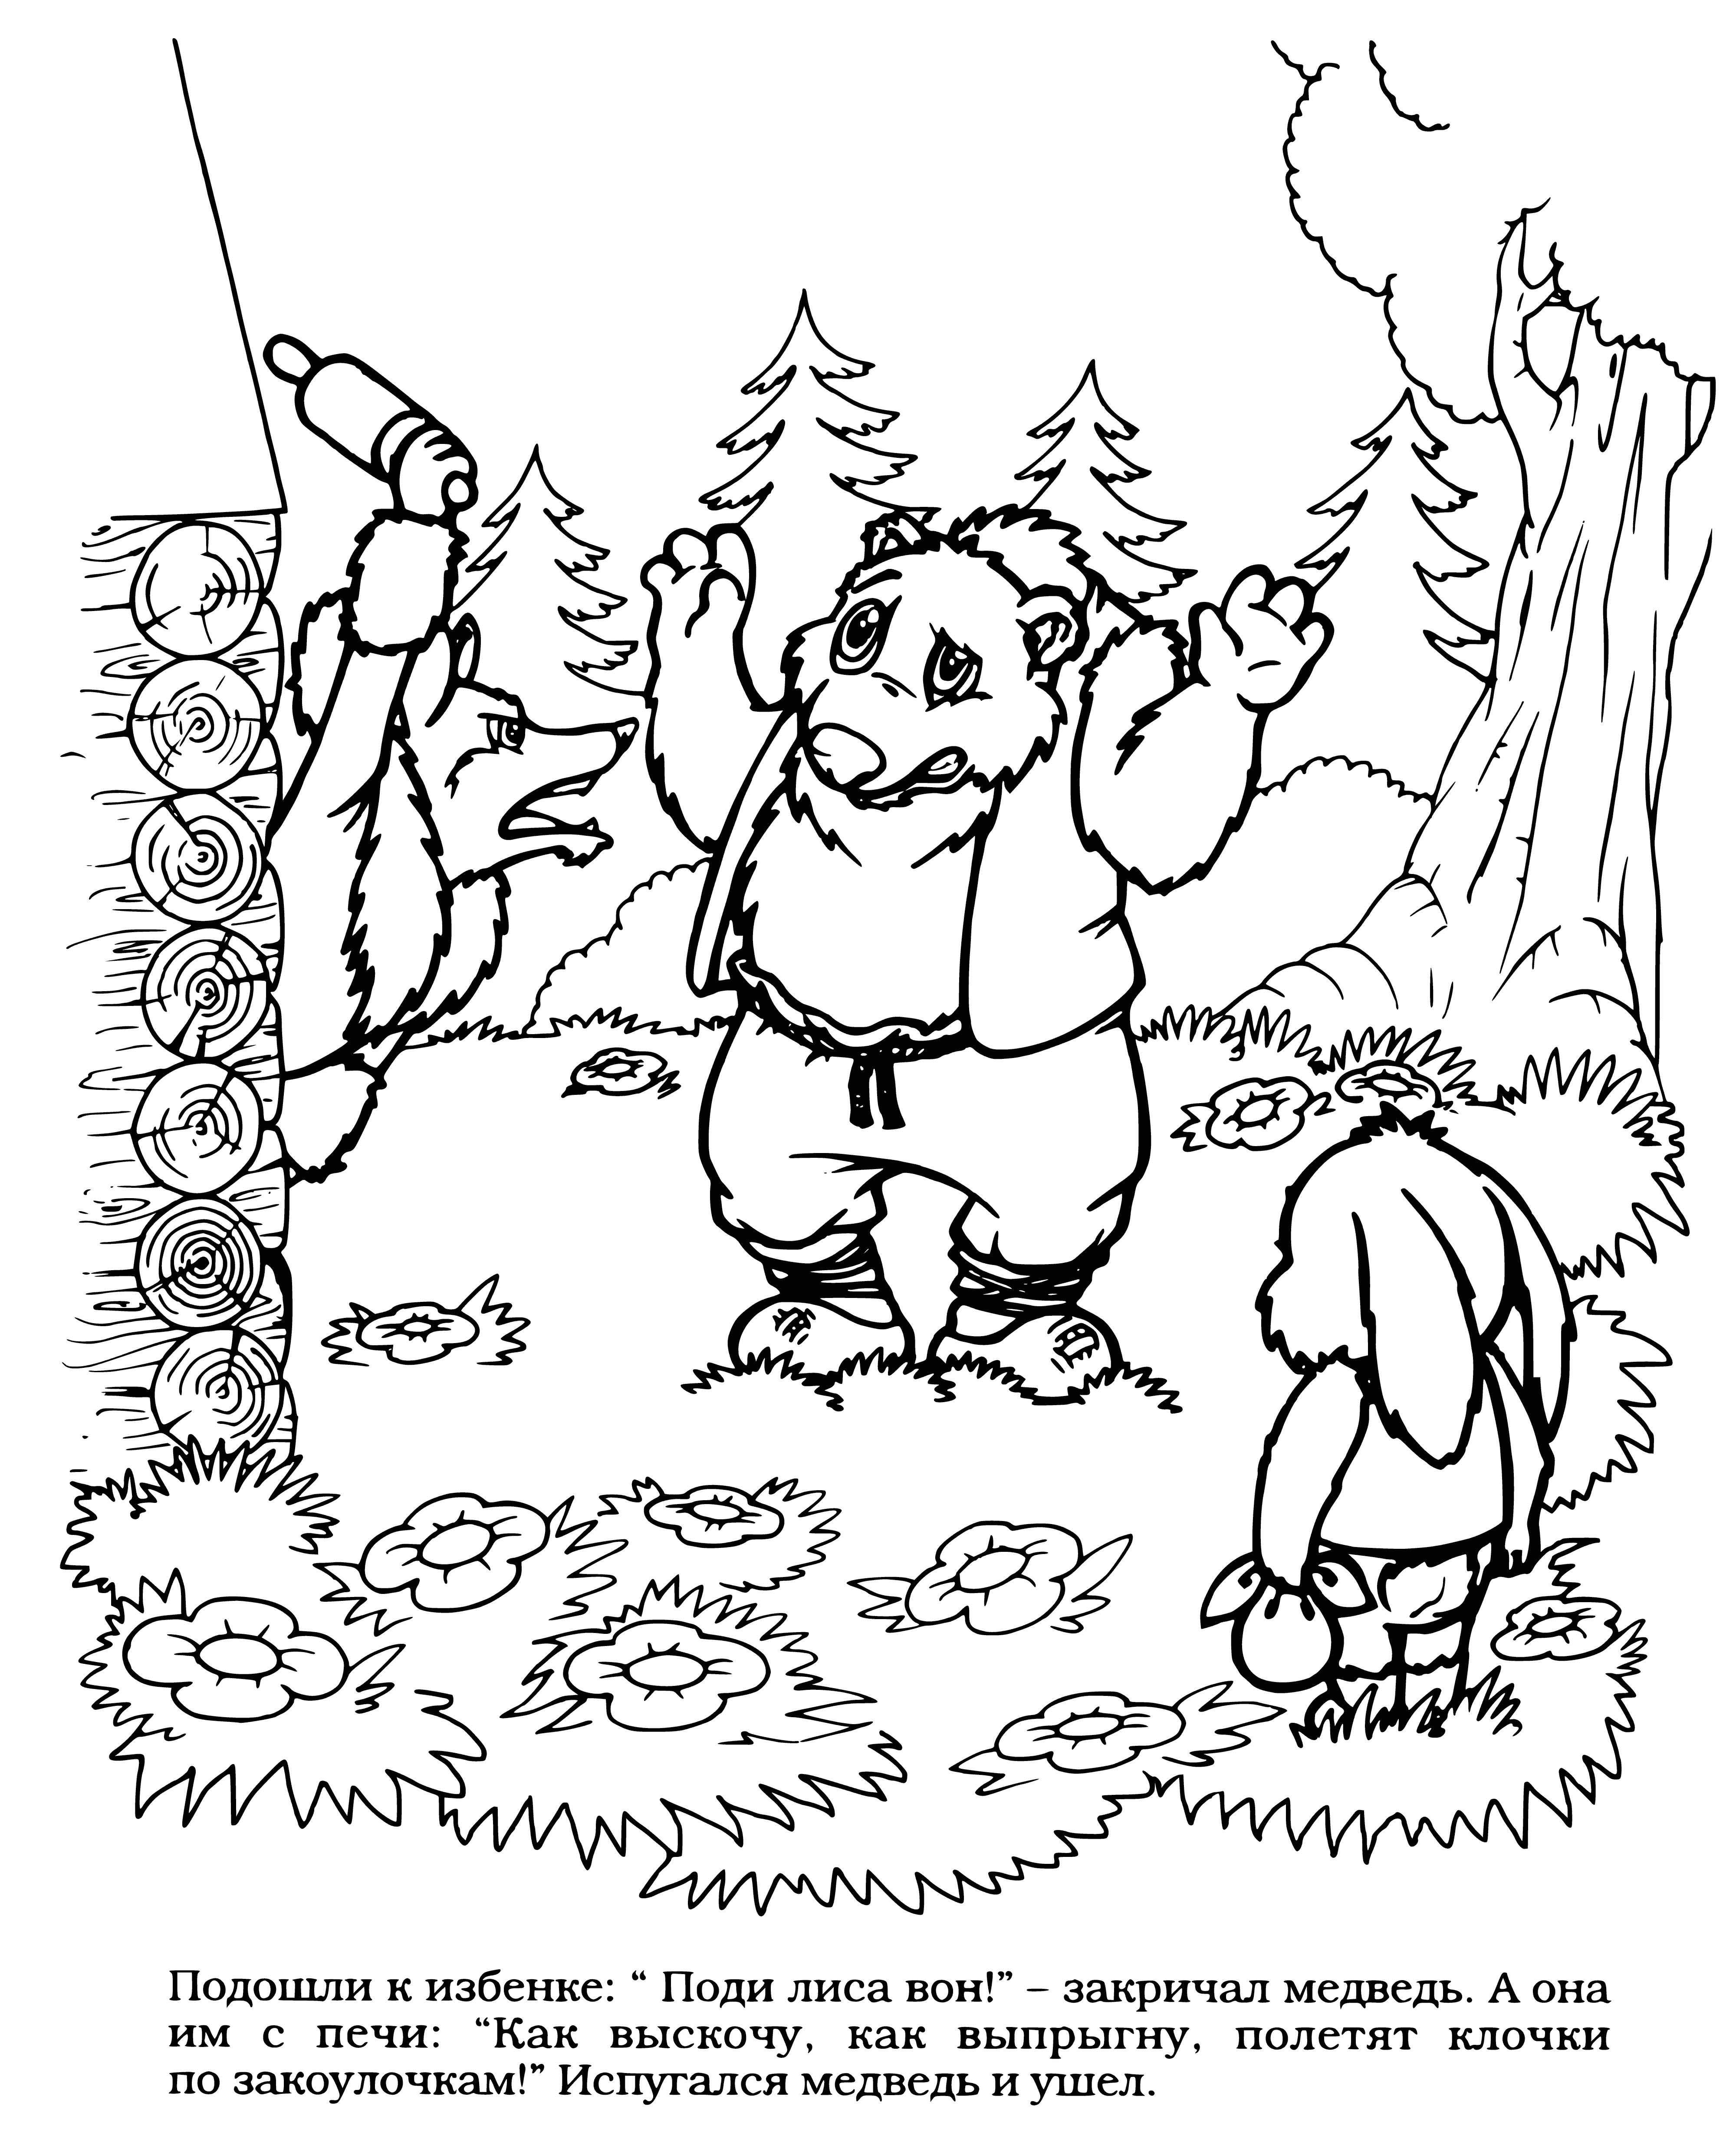 coloring page: Hunters armed with rifles pursue bear through forest. Bear too fast for hunters and runs for its life.